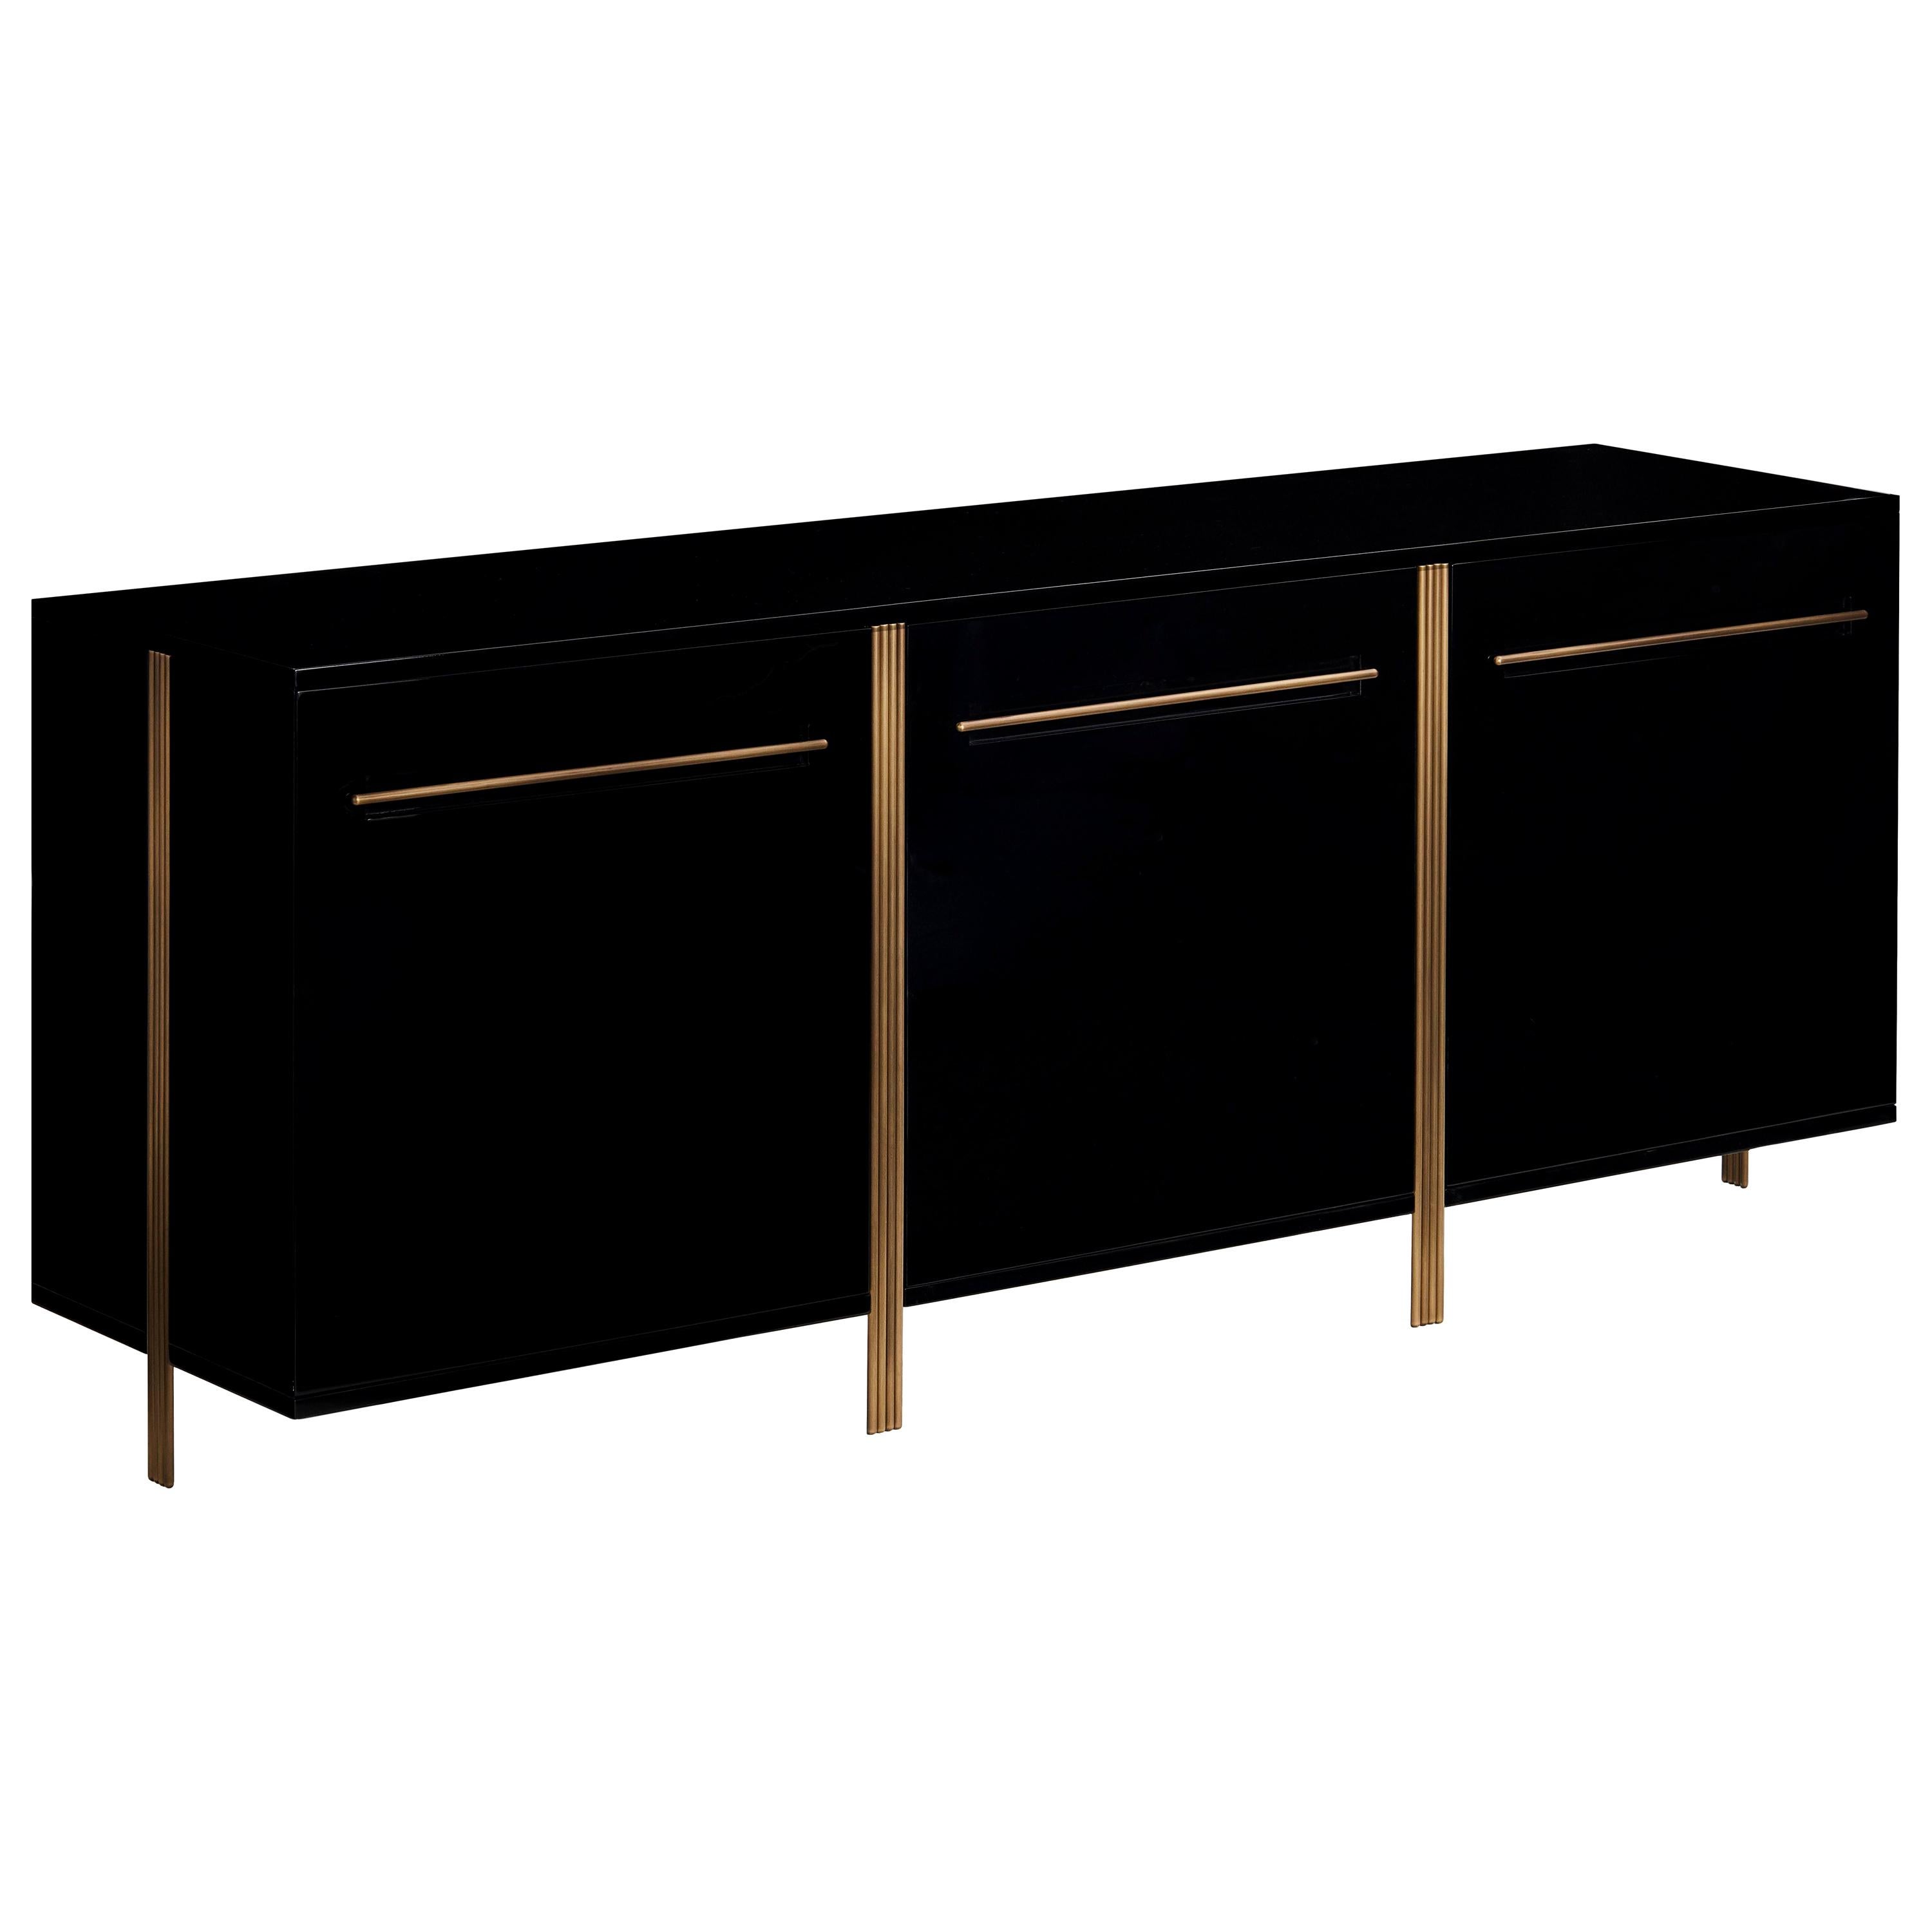 VERSAGA sideboard in custom colors with Antique Brass handles and feet For Sale